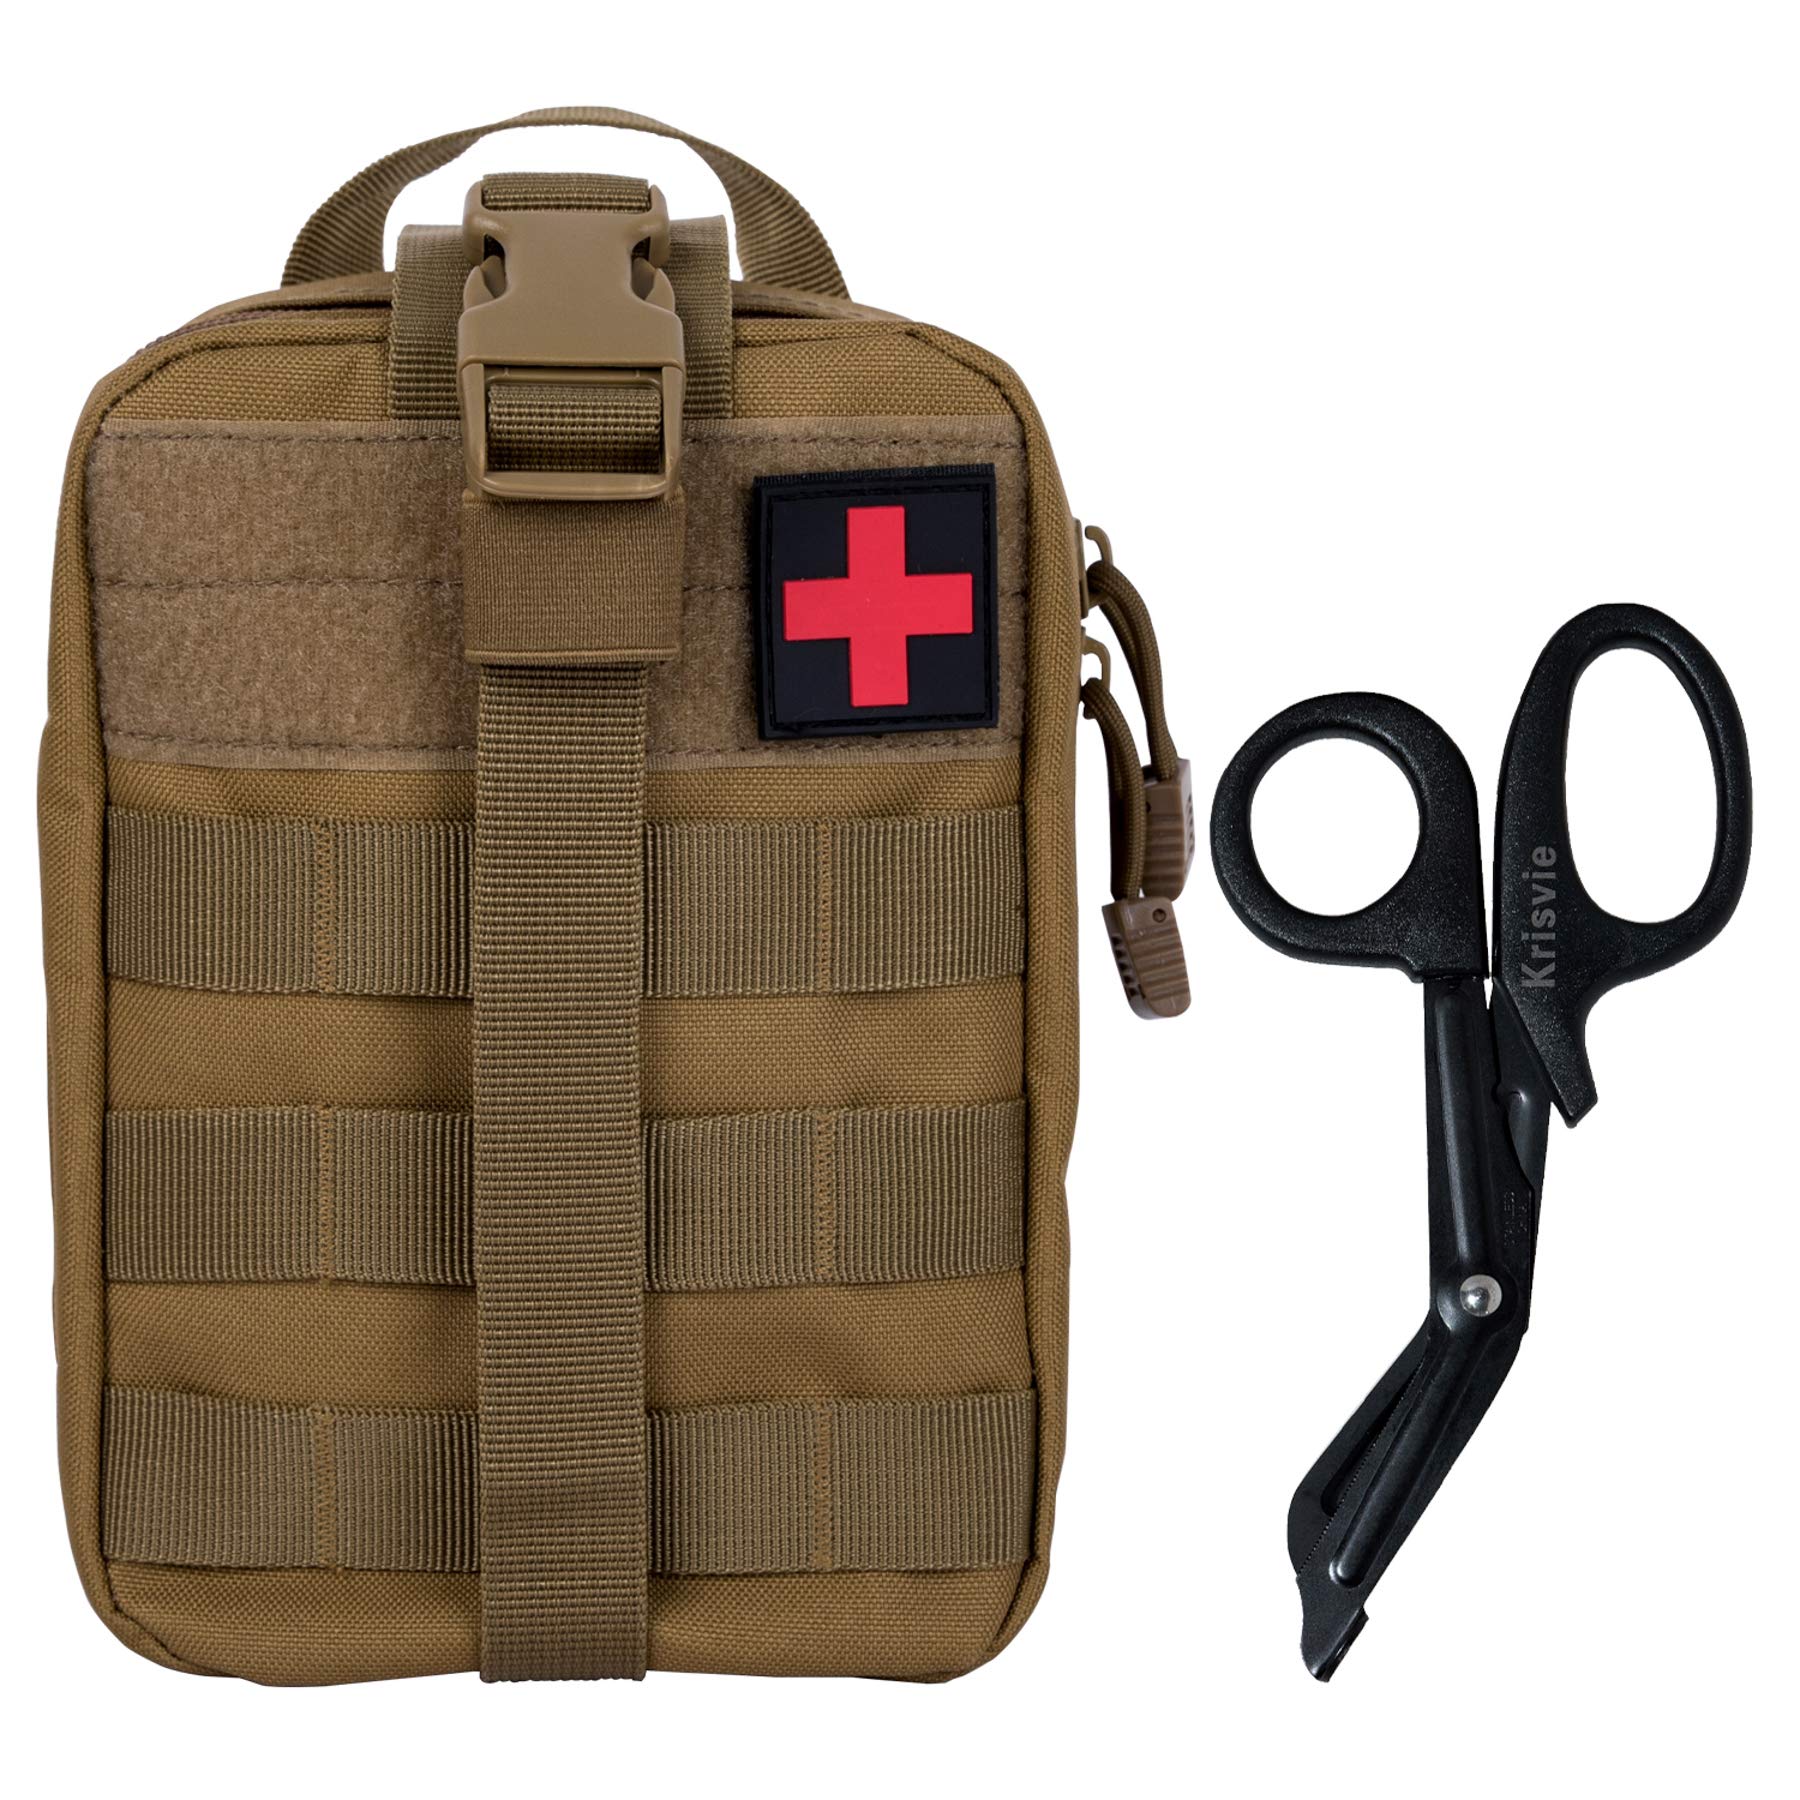 Krisvie First Aid Molle Pouch EMT Pouch Detachable Tactical Medical Bag for Outdoor Activities with Shear